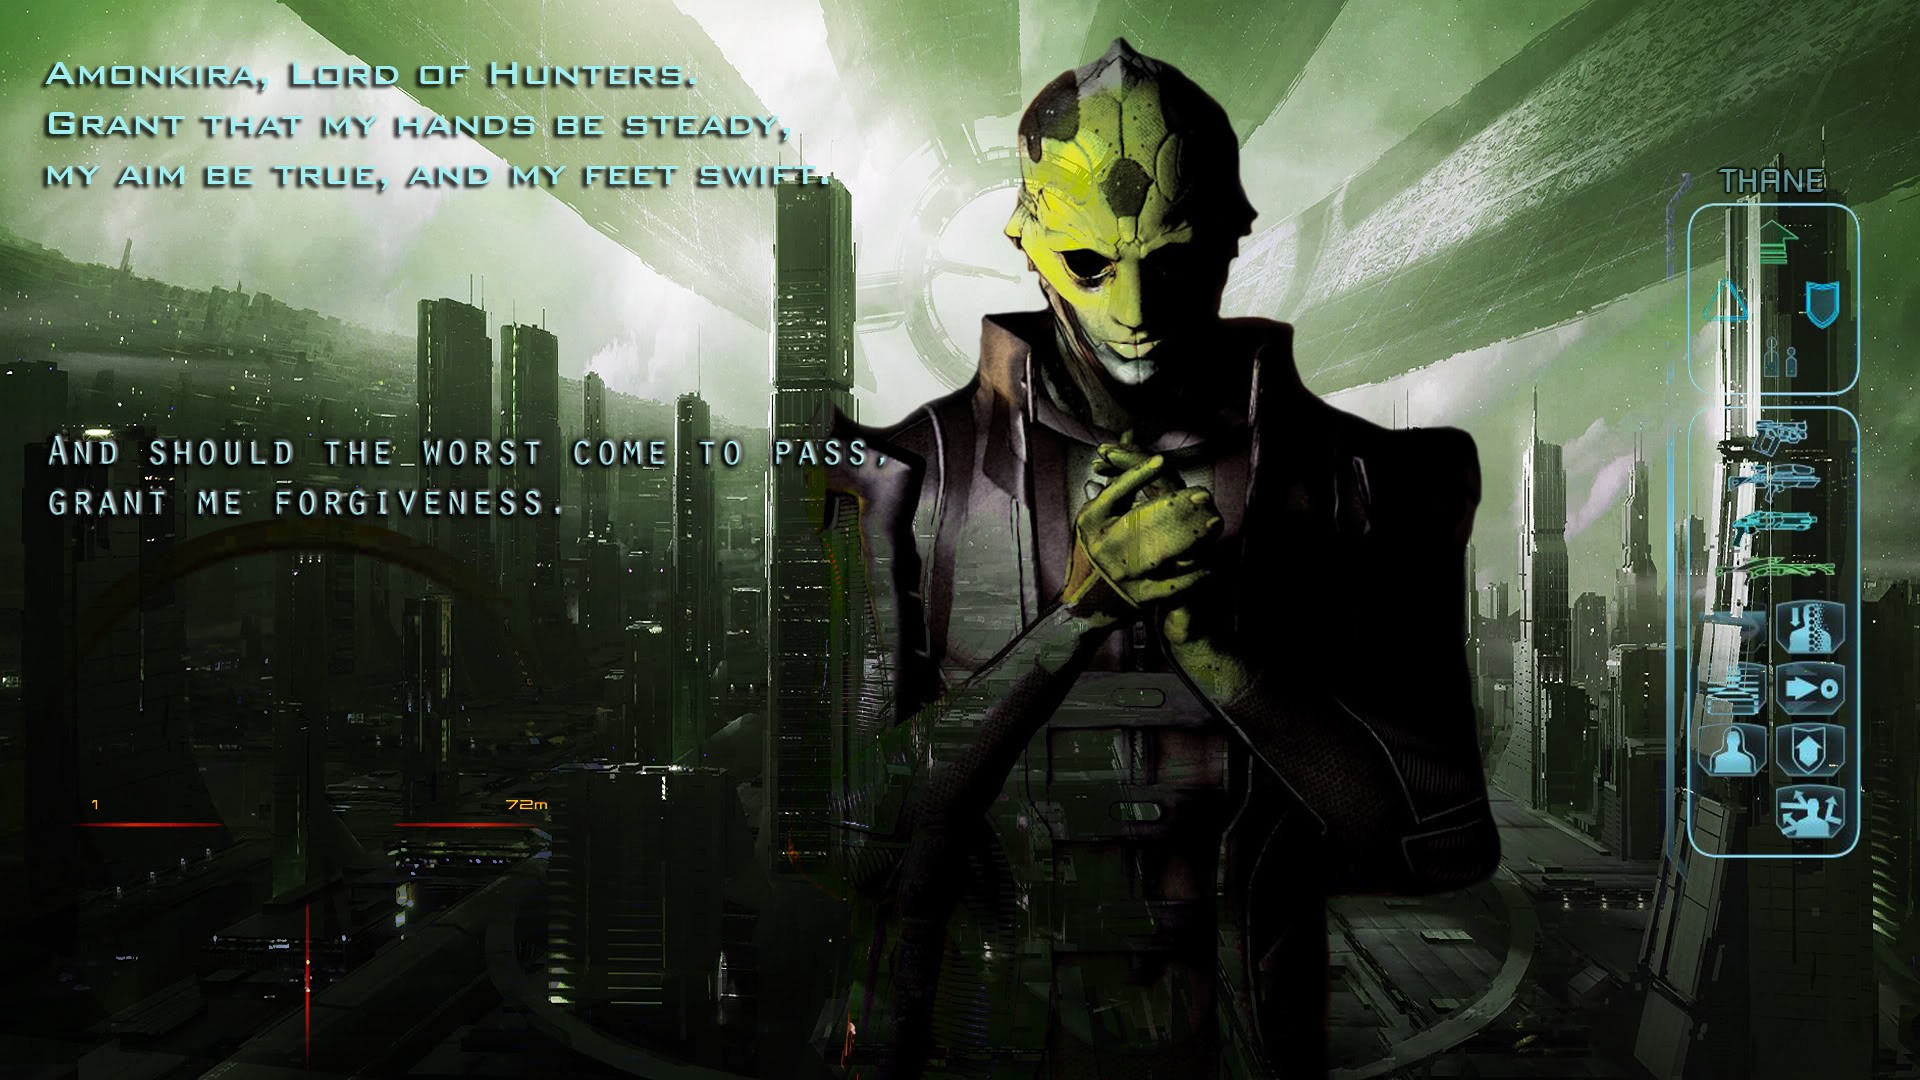 video Game Characters, Thane Krios, Mass Effect, Green, Space Wallpaper